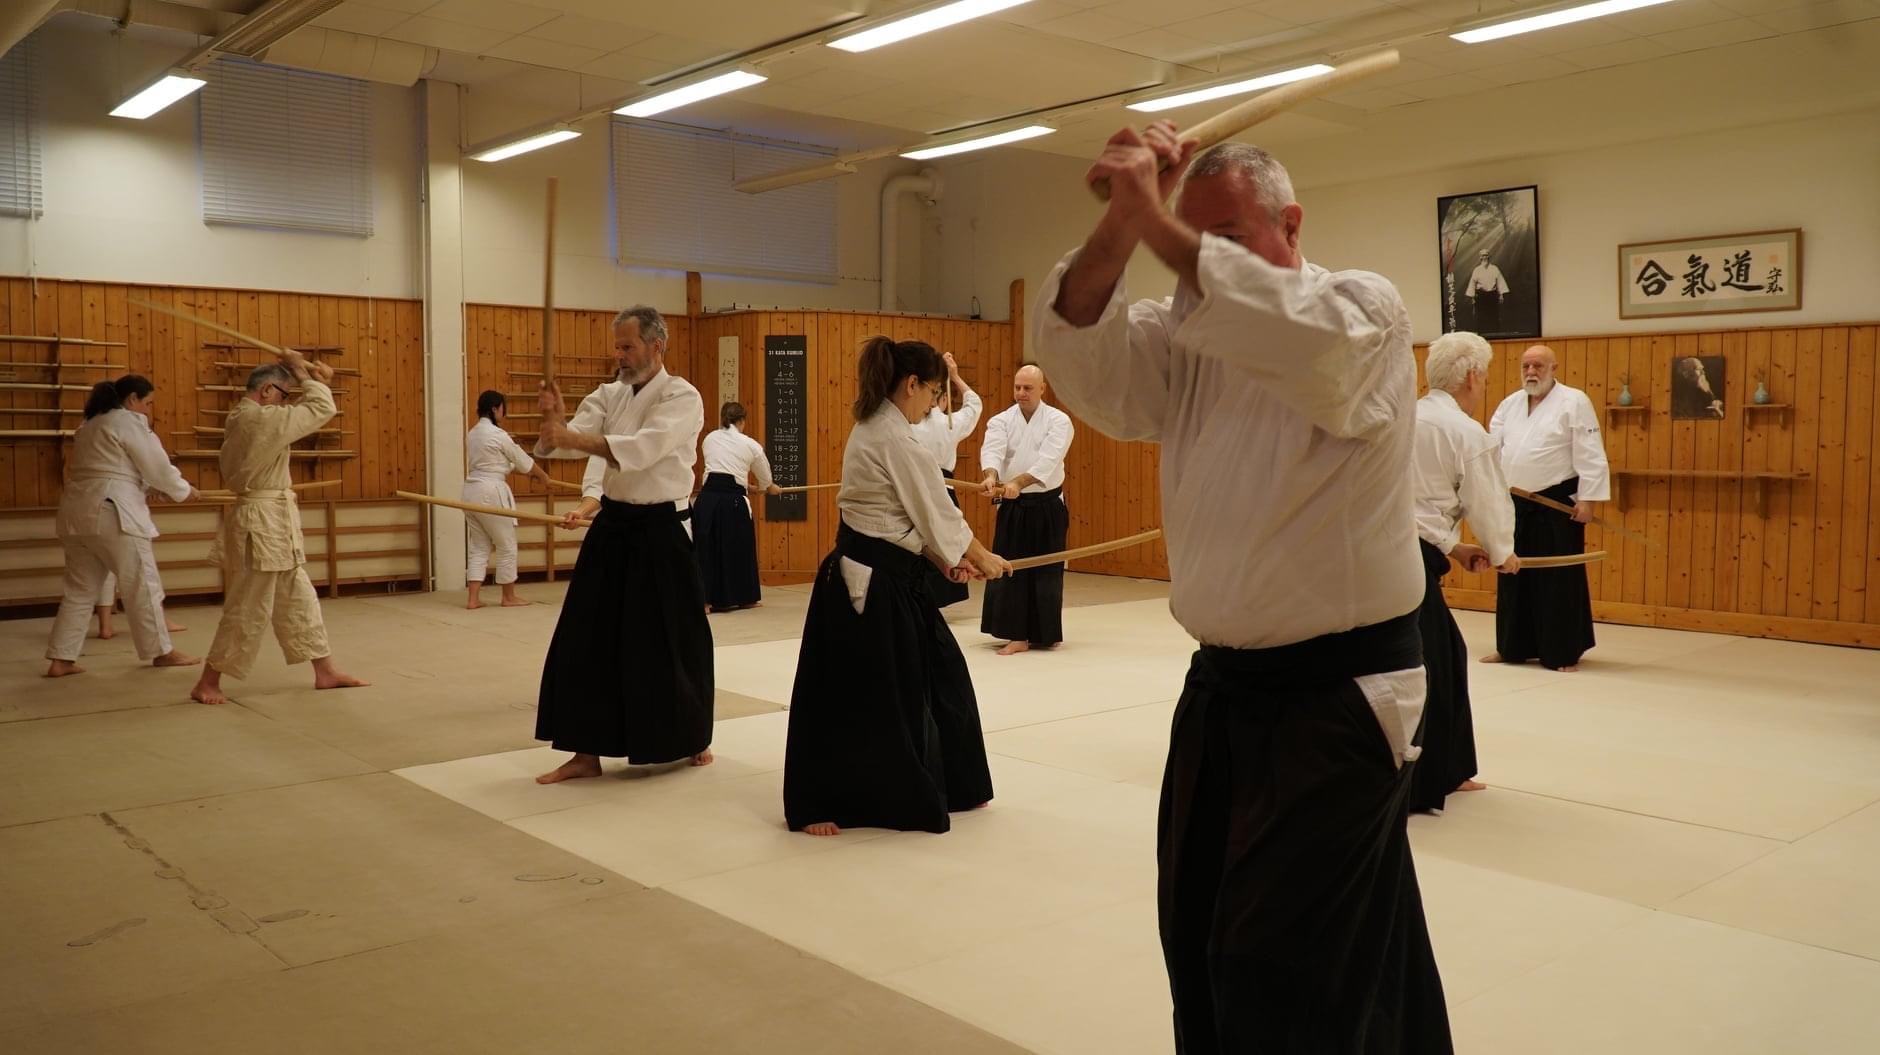 Training with weapons in aikido dojo